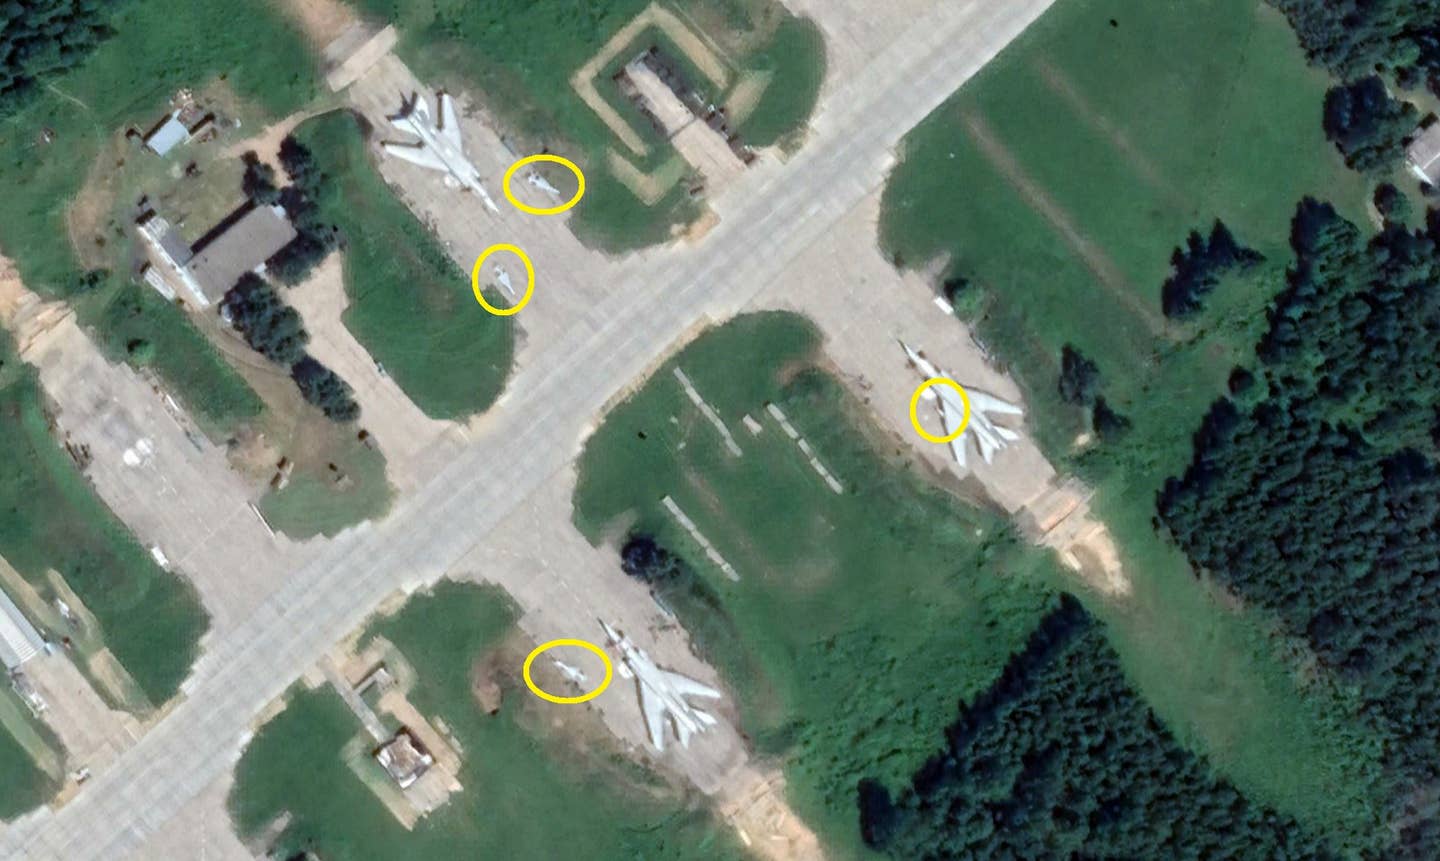 Tu-22M3s are seen with Kh-22 or Kh-32 missiles ready to be loaded, at Shaykovka, in June 2022. <em>Google Earth</em>